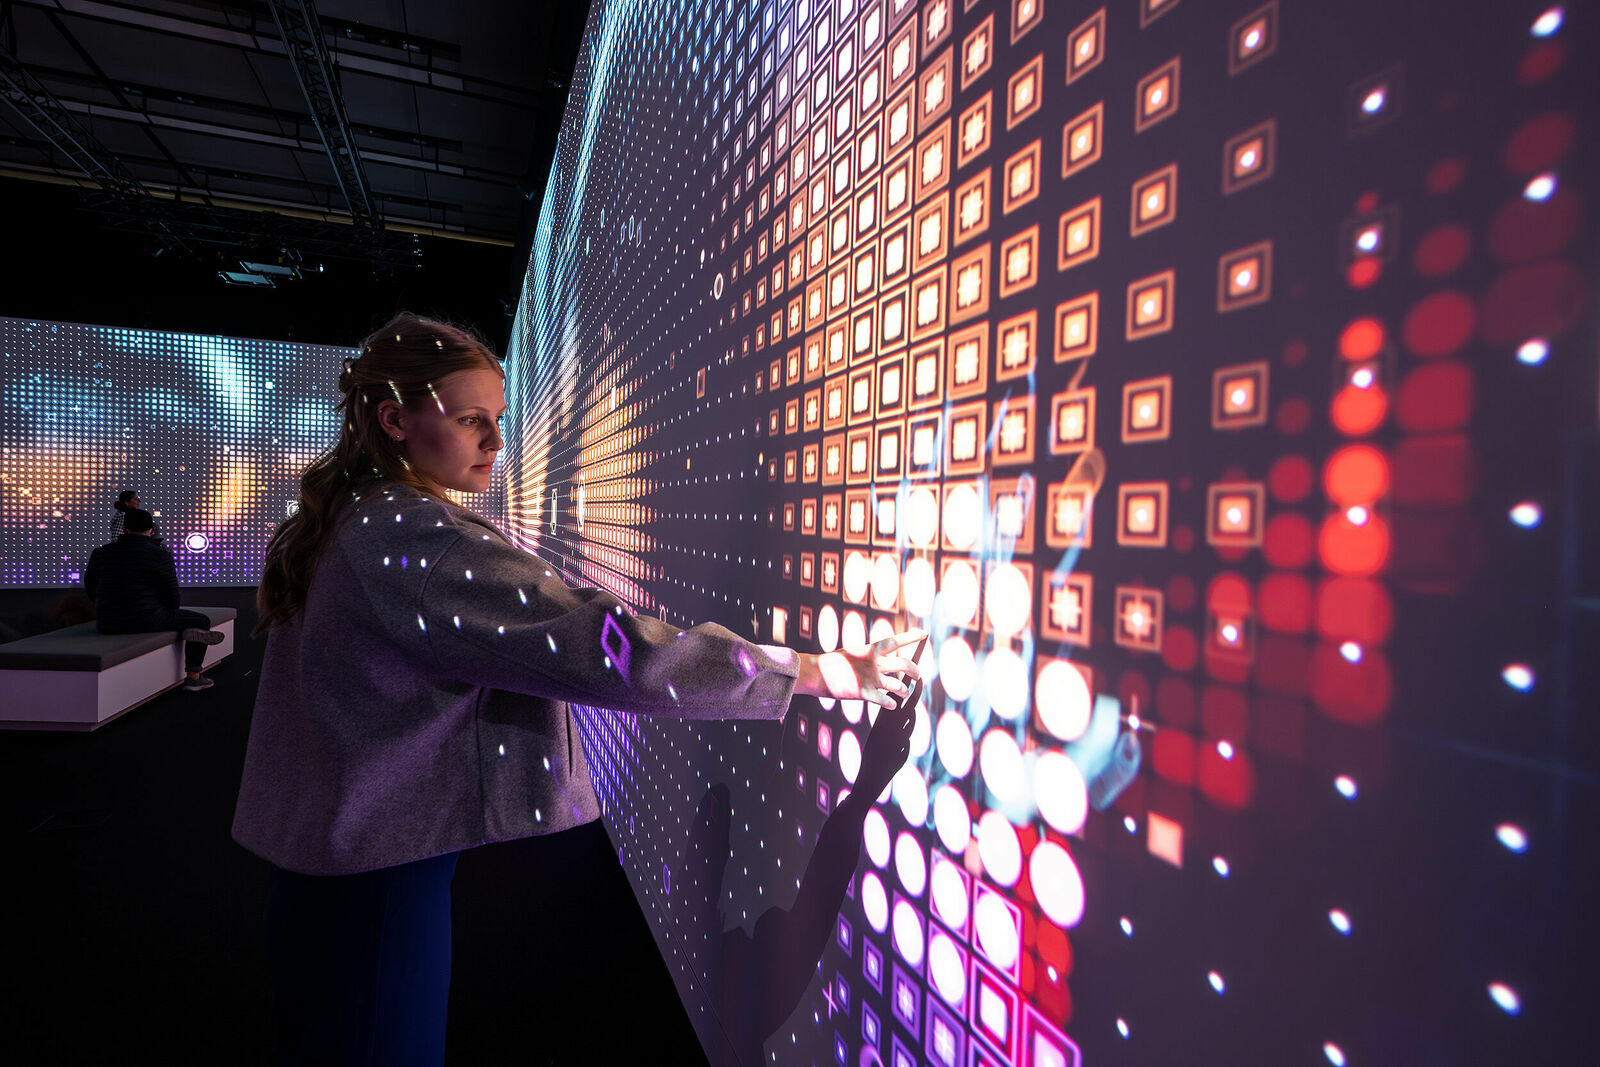 A person interacts with a wall display showing a colorful pattern of illuminated squares.